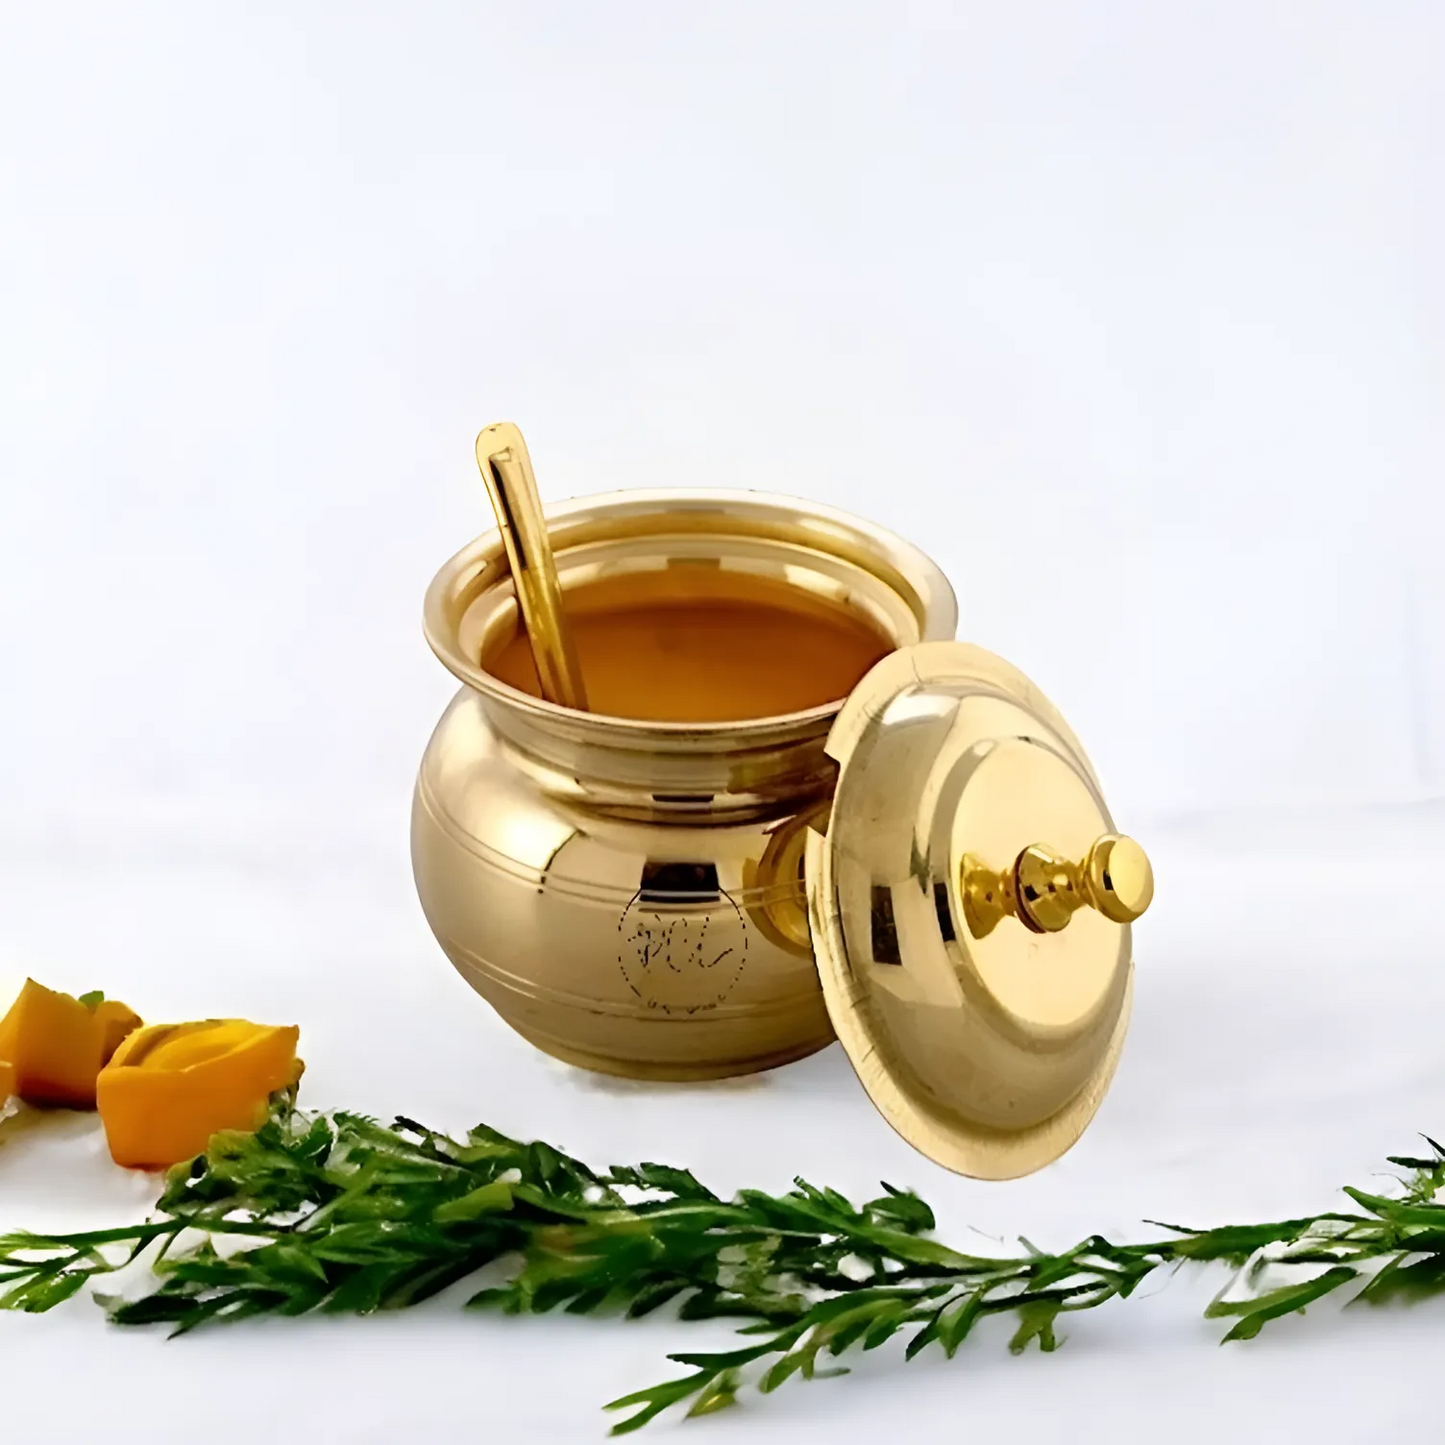 PCL Brass Ghee Pot 100% made up of pure brass with a classic look.